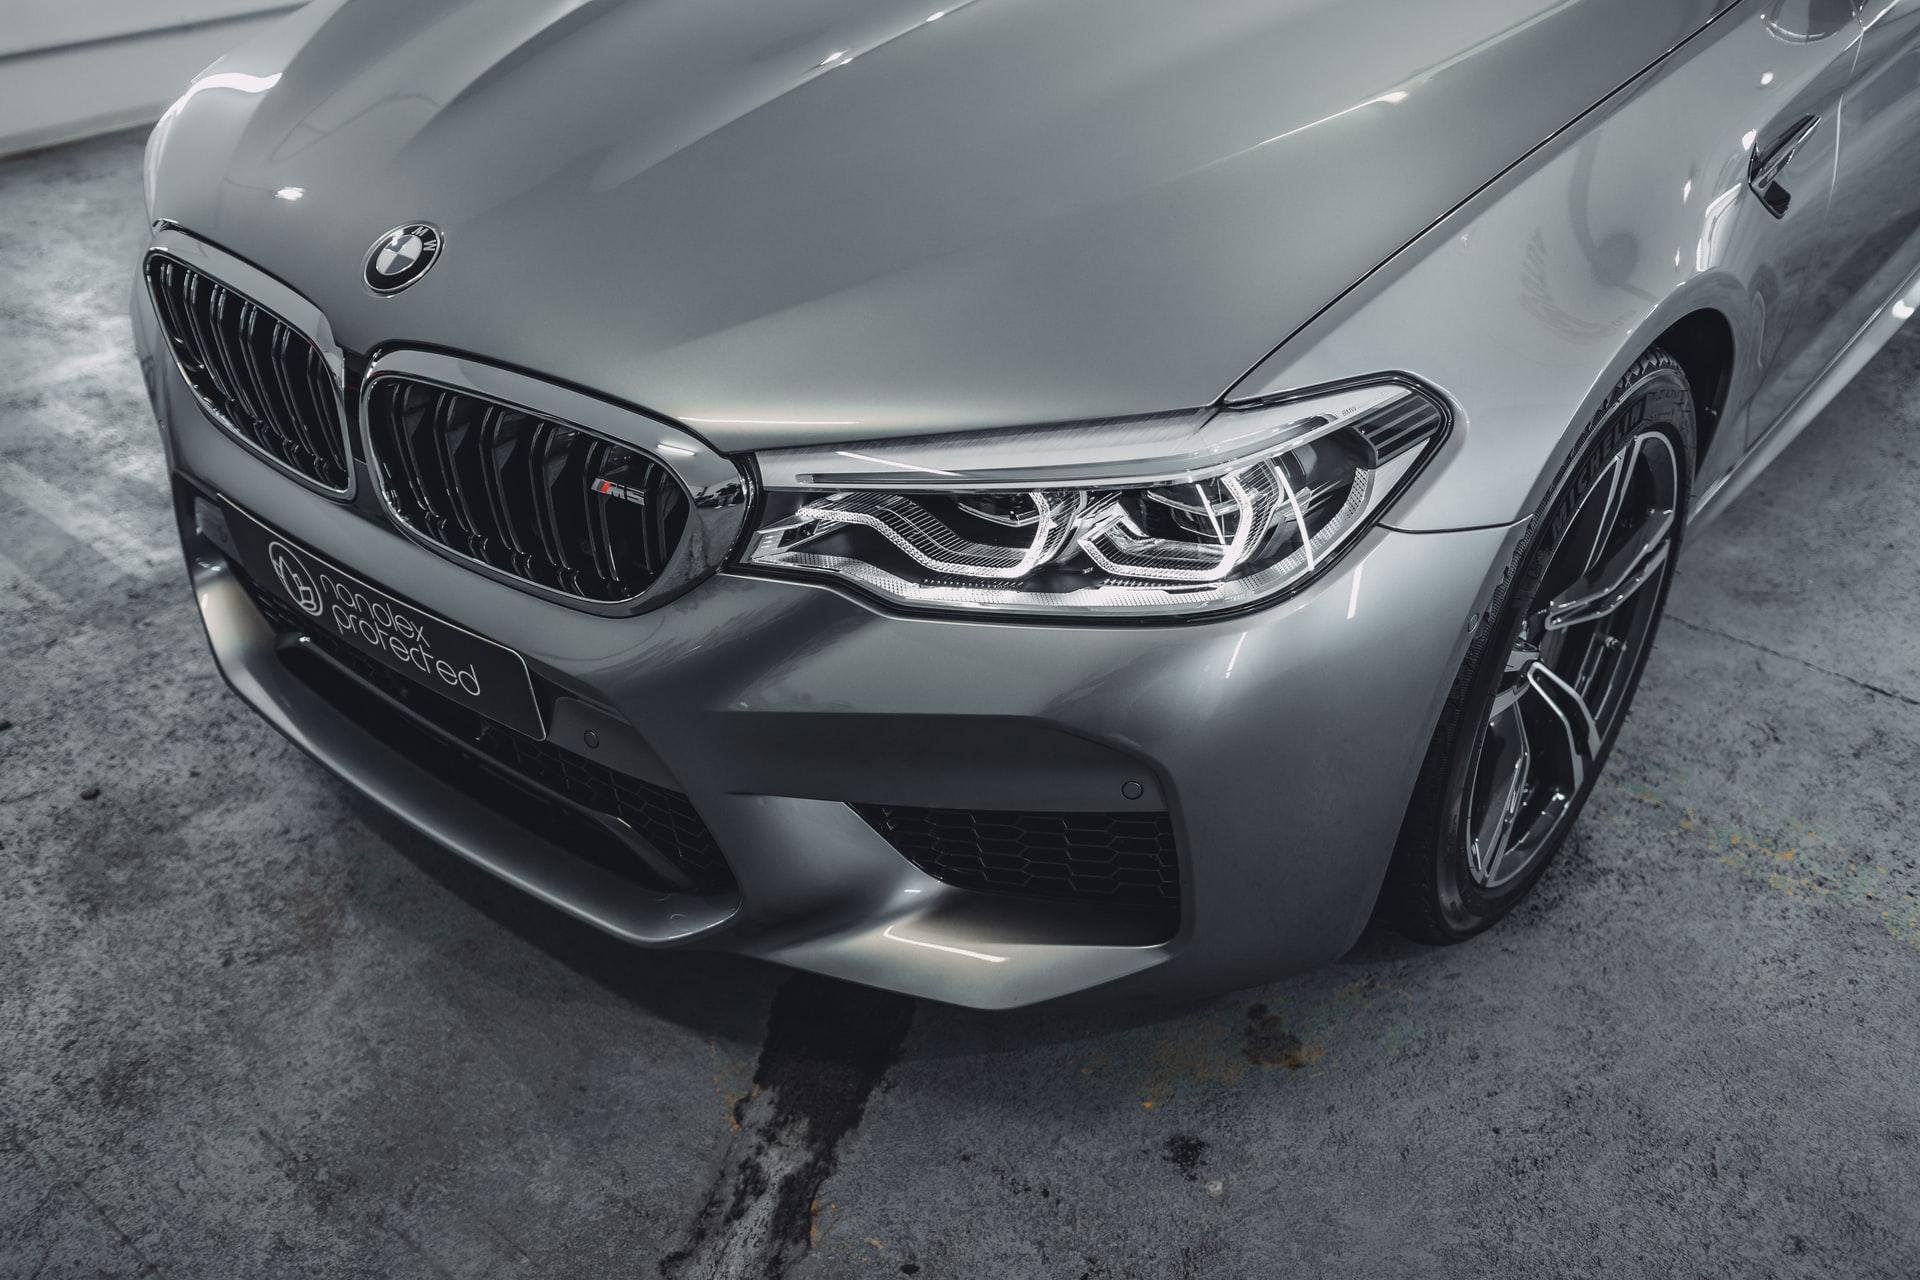 The BMW M5 CS will be the brand’s fastest street-legal vehicle.